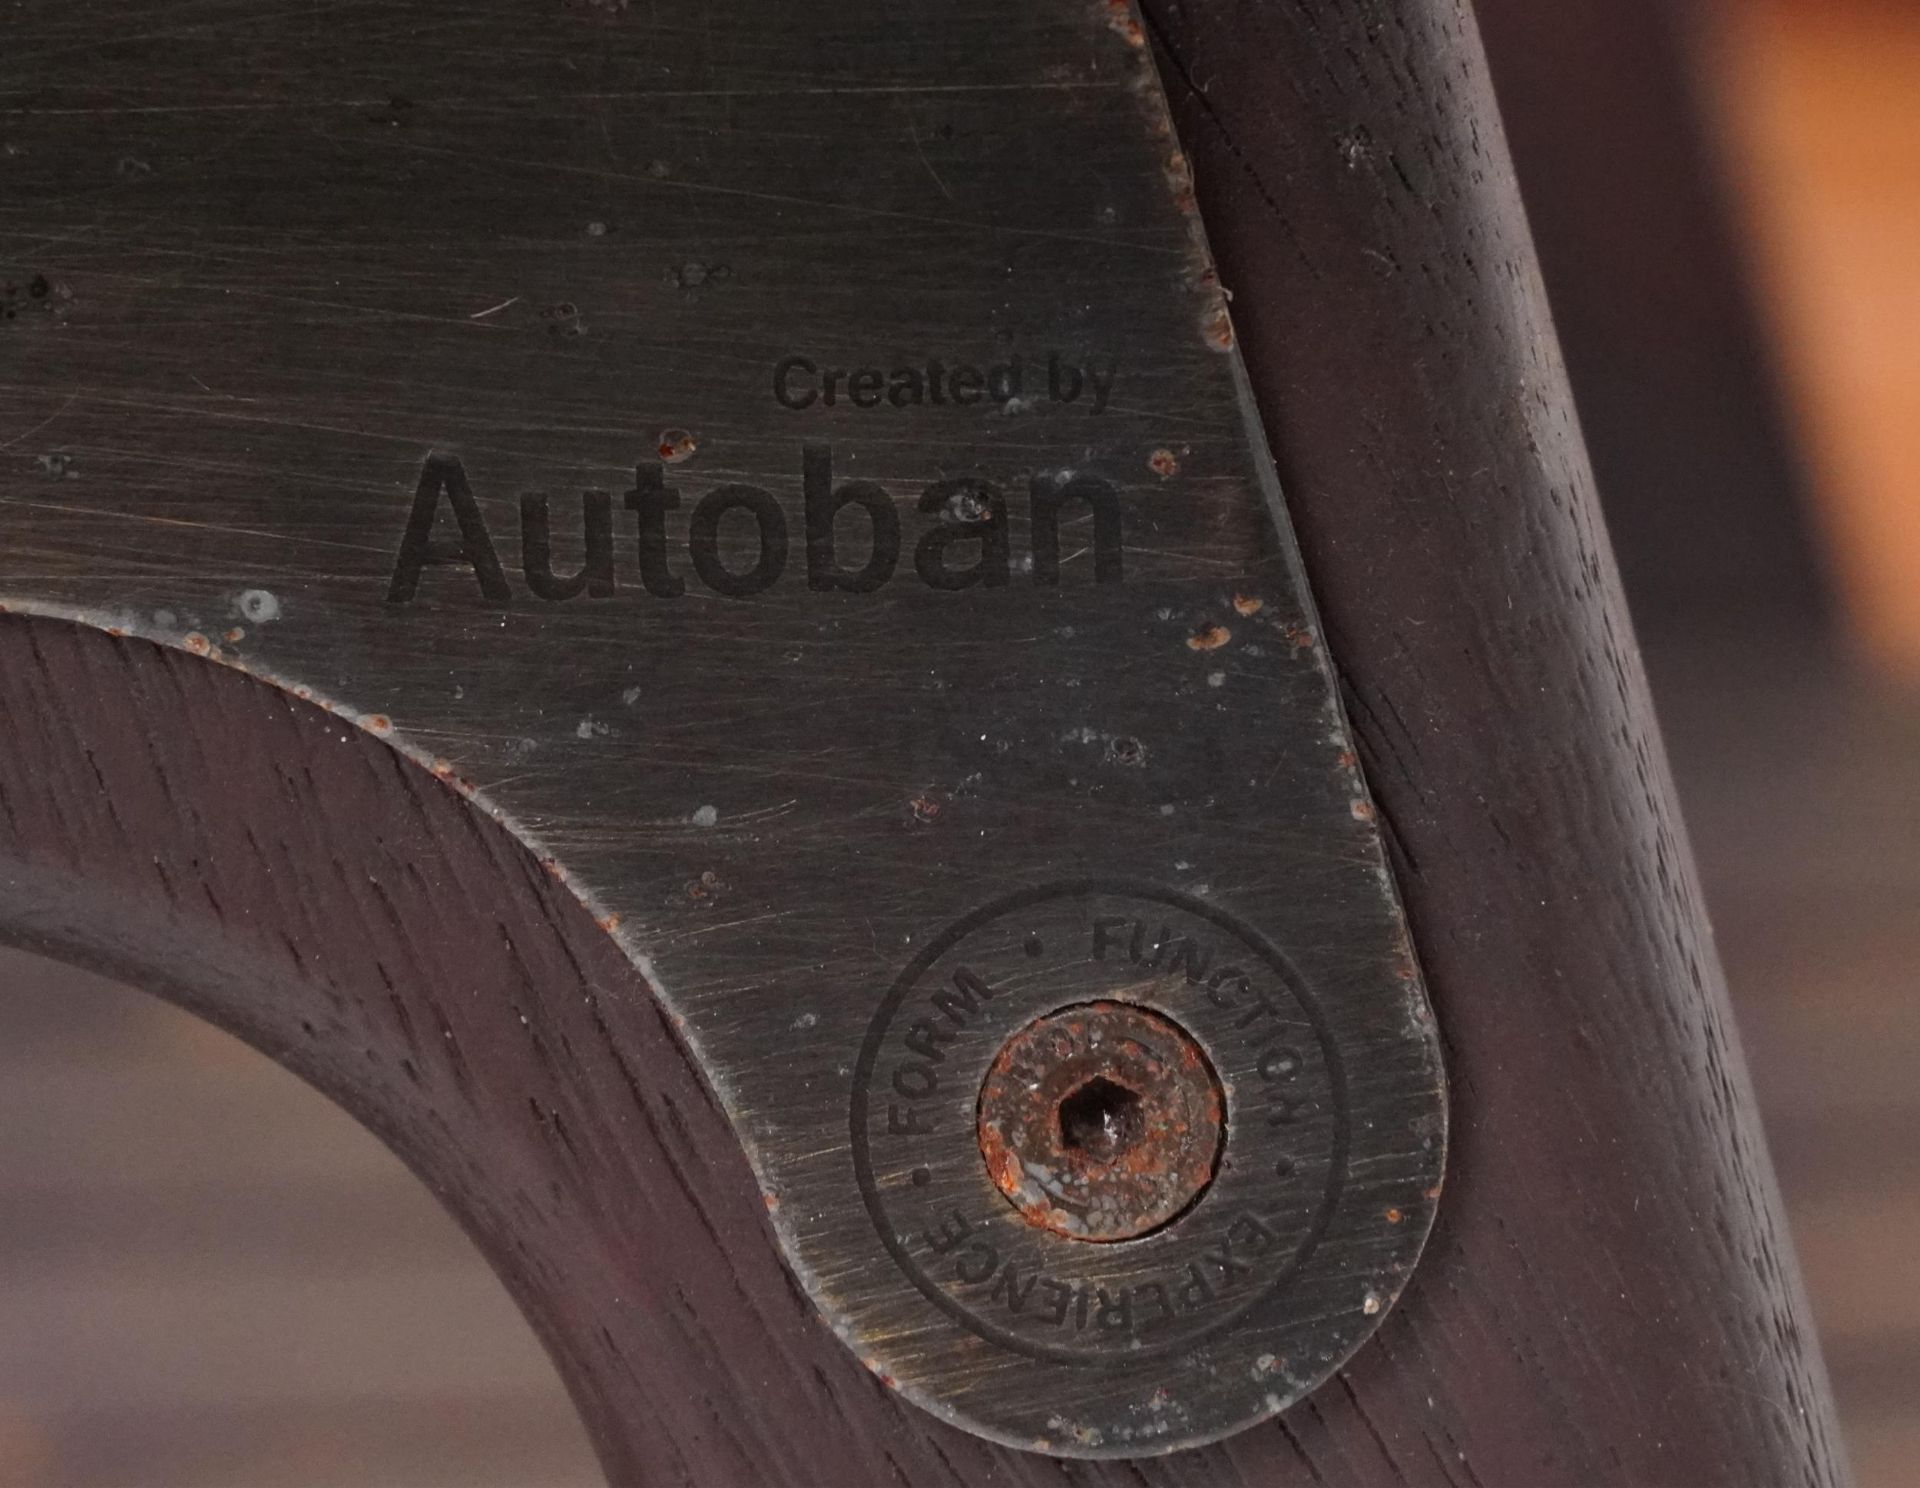 Autoban, stained teak slice chair, 81cm high - Image 5 of 5